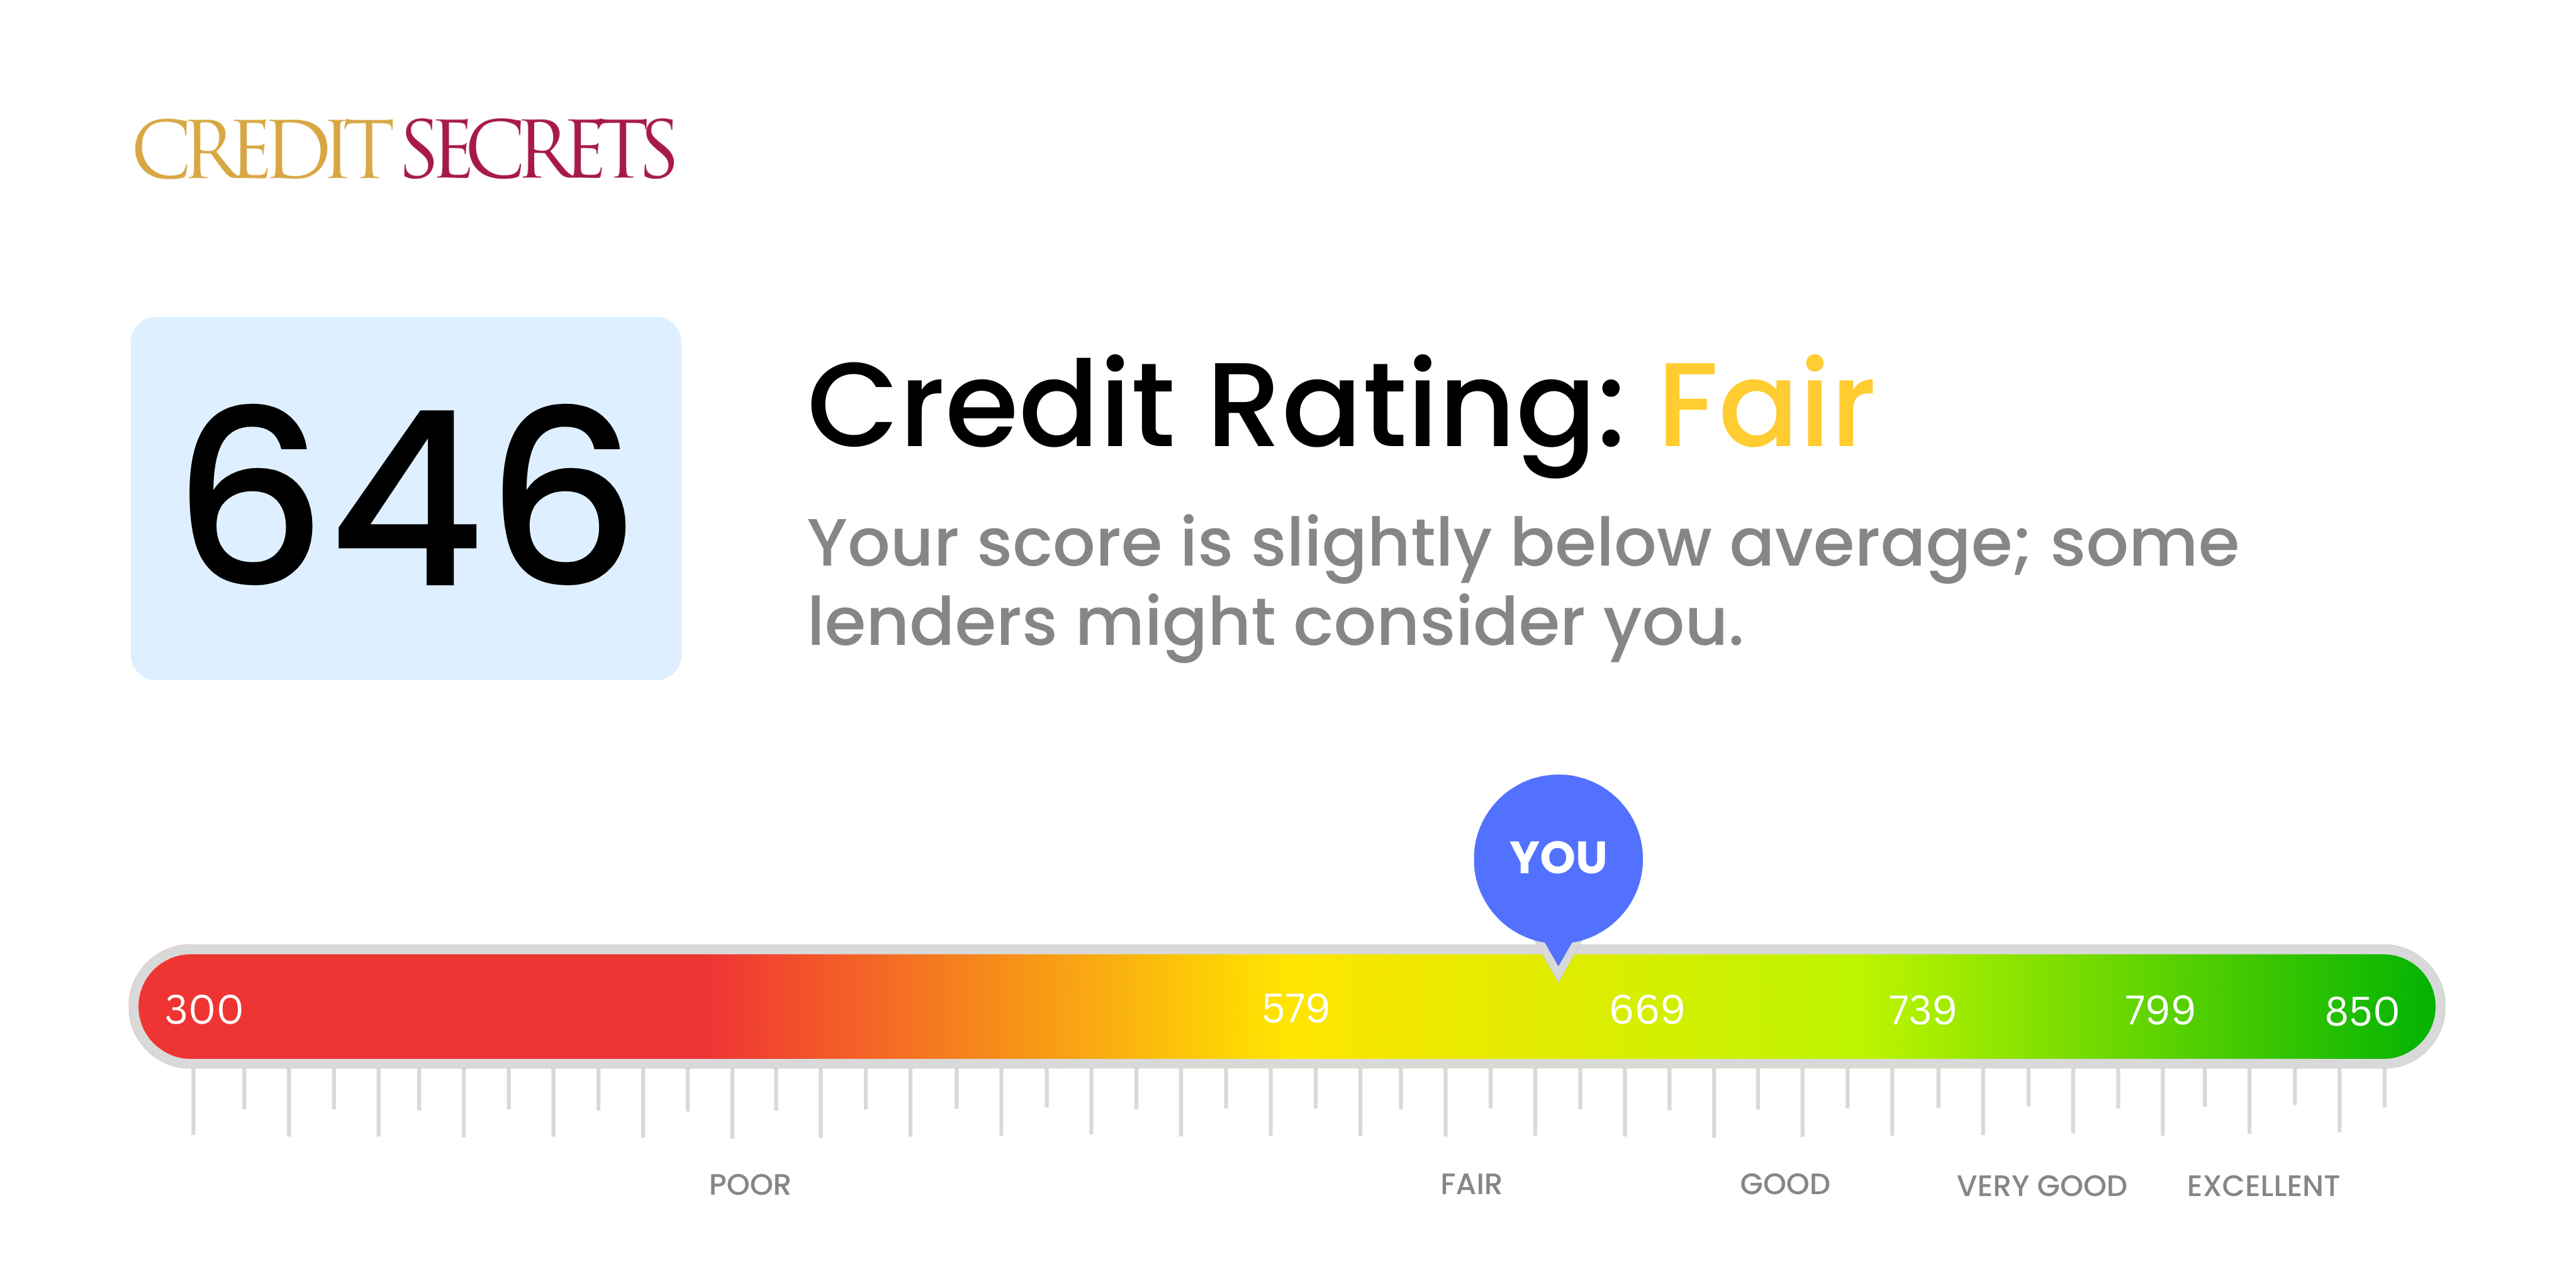 Is 646 a good credit score?